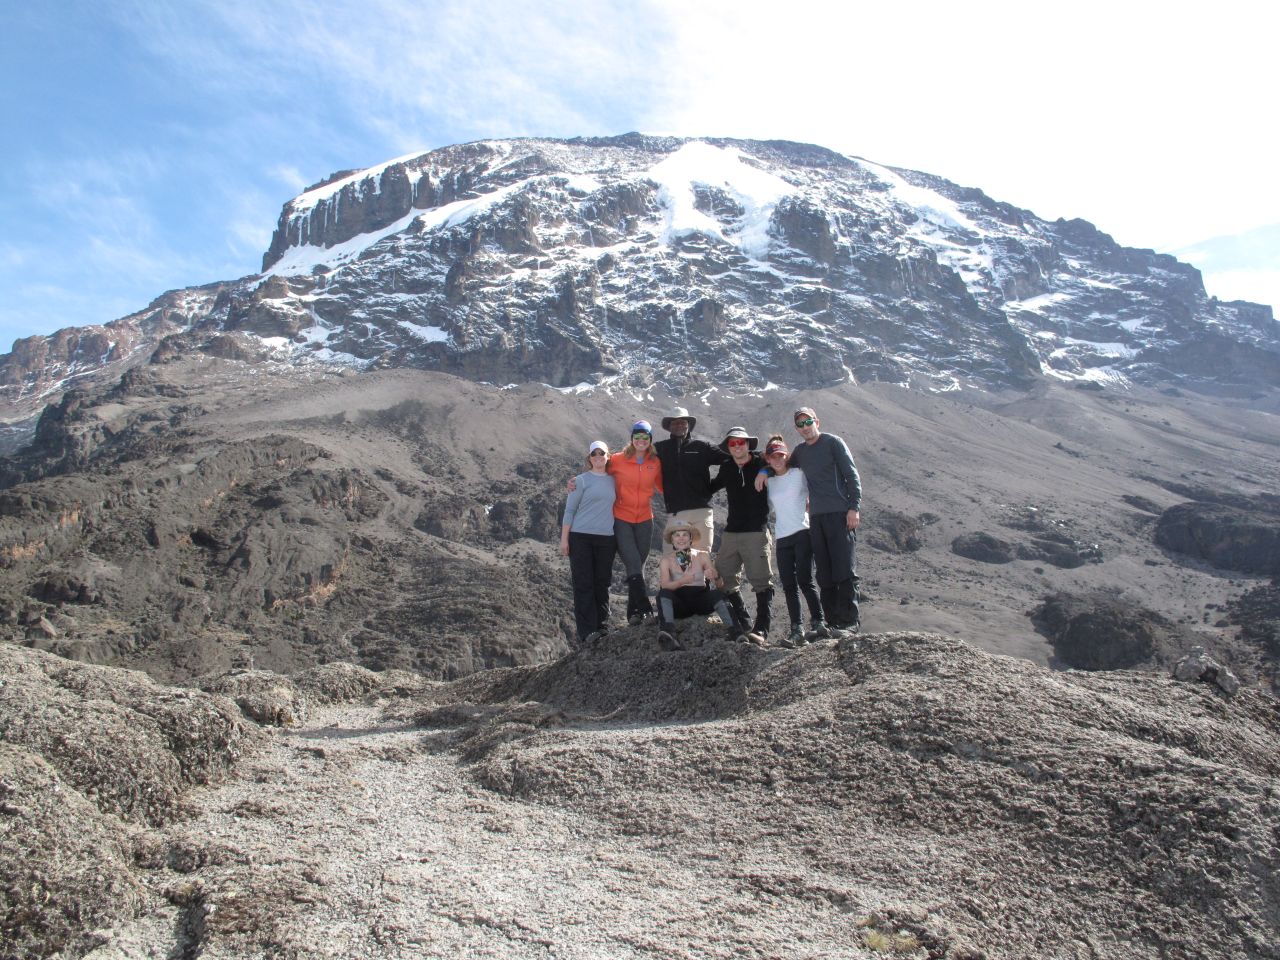 The six Americans in Brooke's group pose with guide Dismass in front of majestic Kilimanjaro.